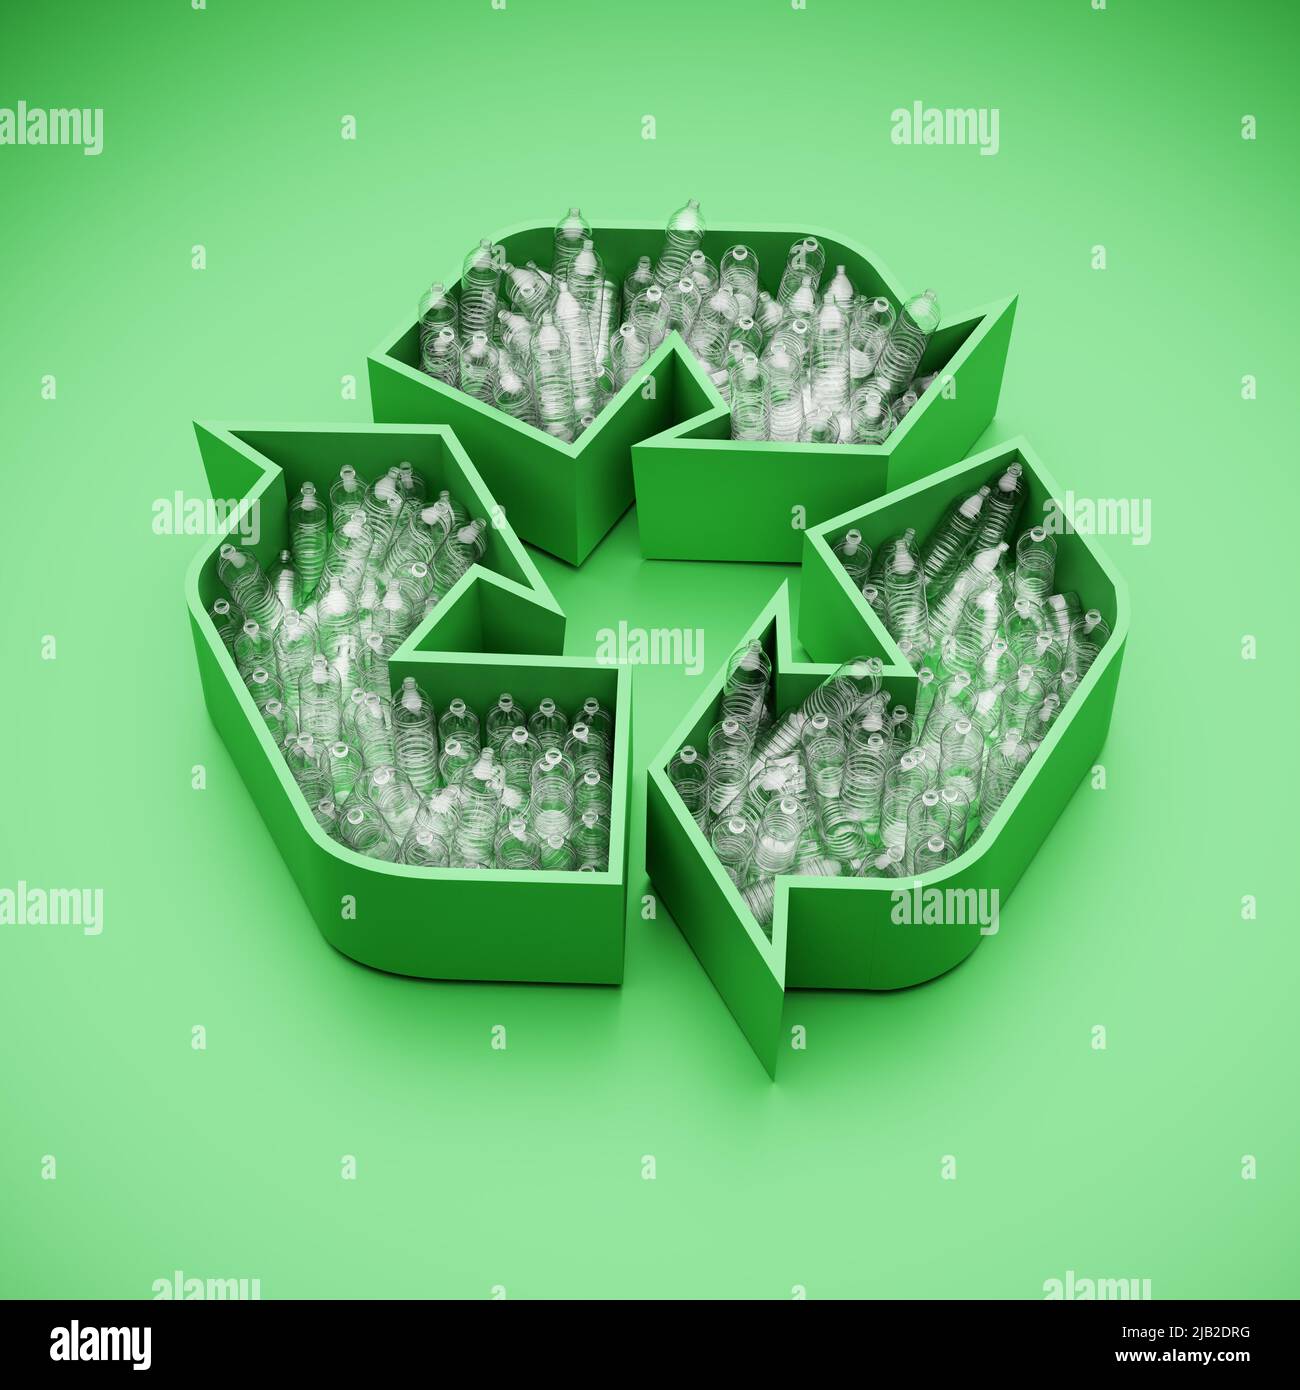 Empty plastic water bottles in a green recycling logo. Concept for recycling of plastic waste. Stock Photo